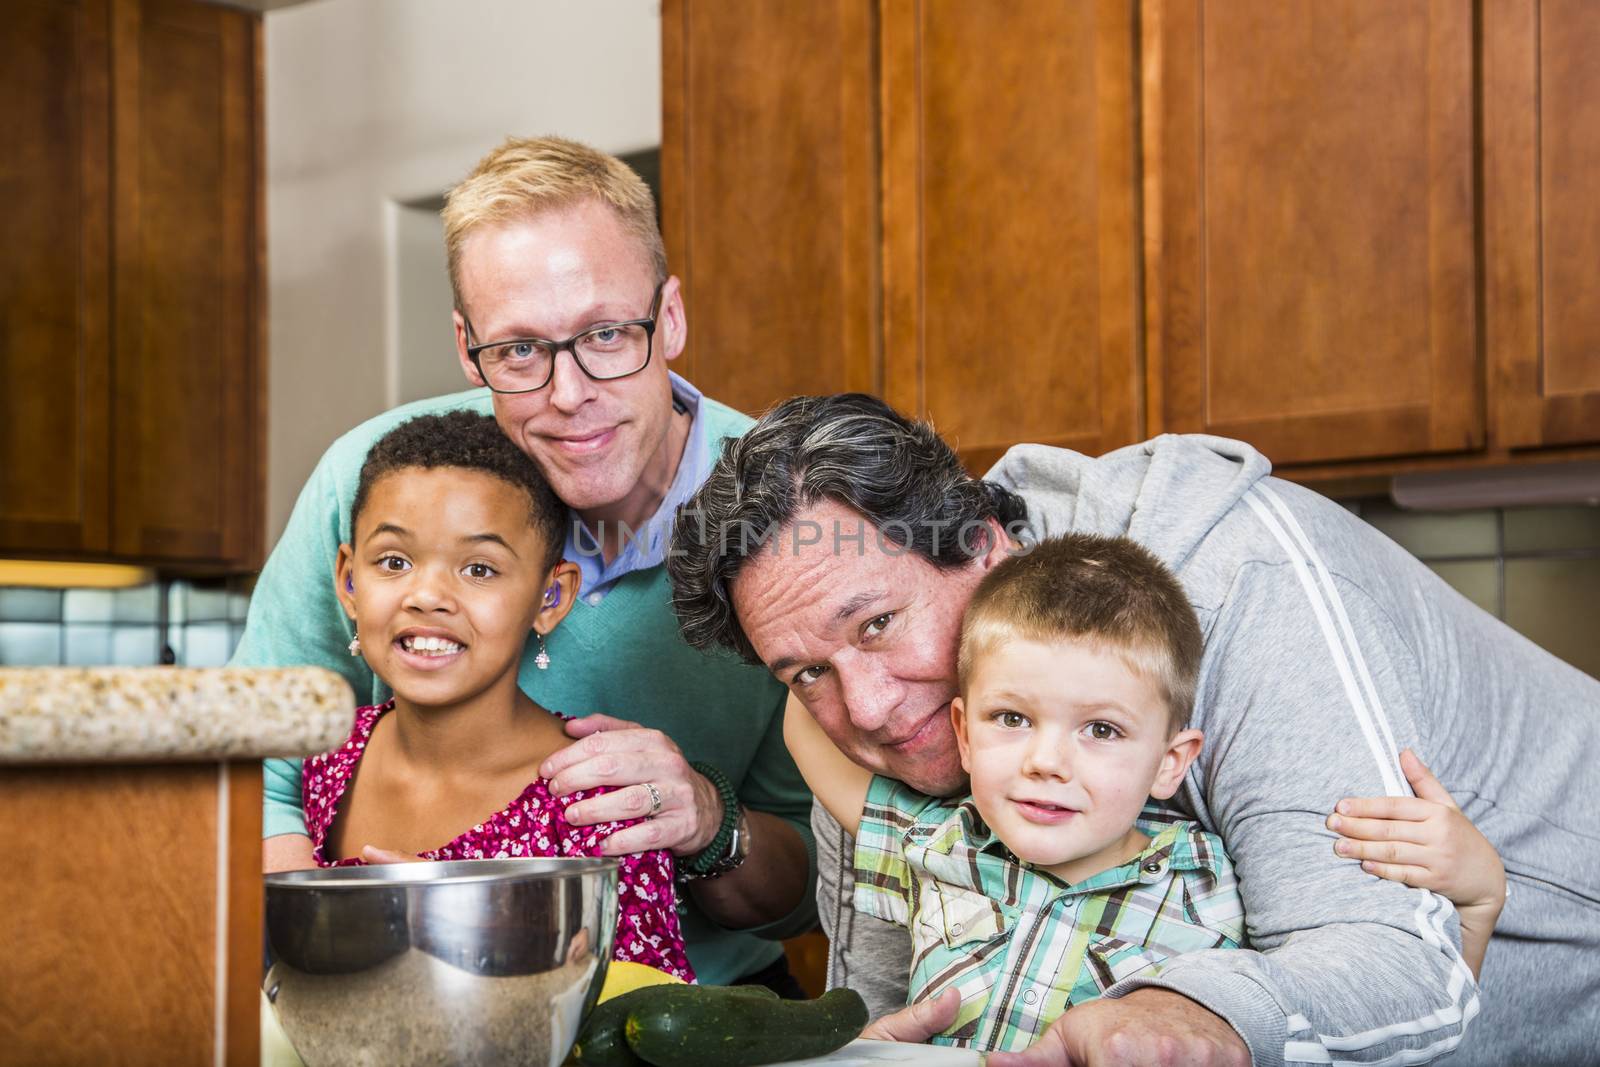 Gay with their kids in a residential kitchen